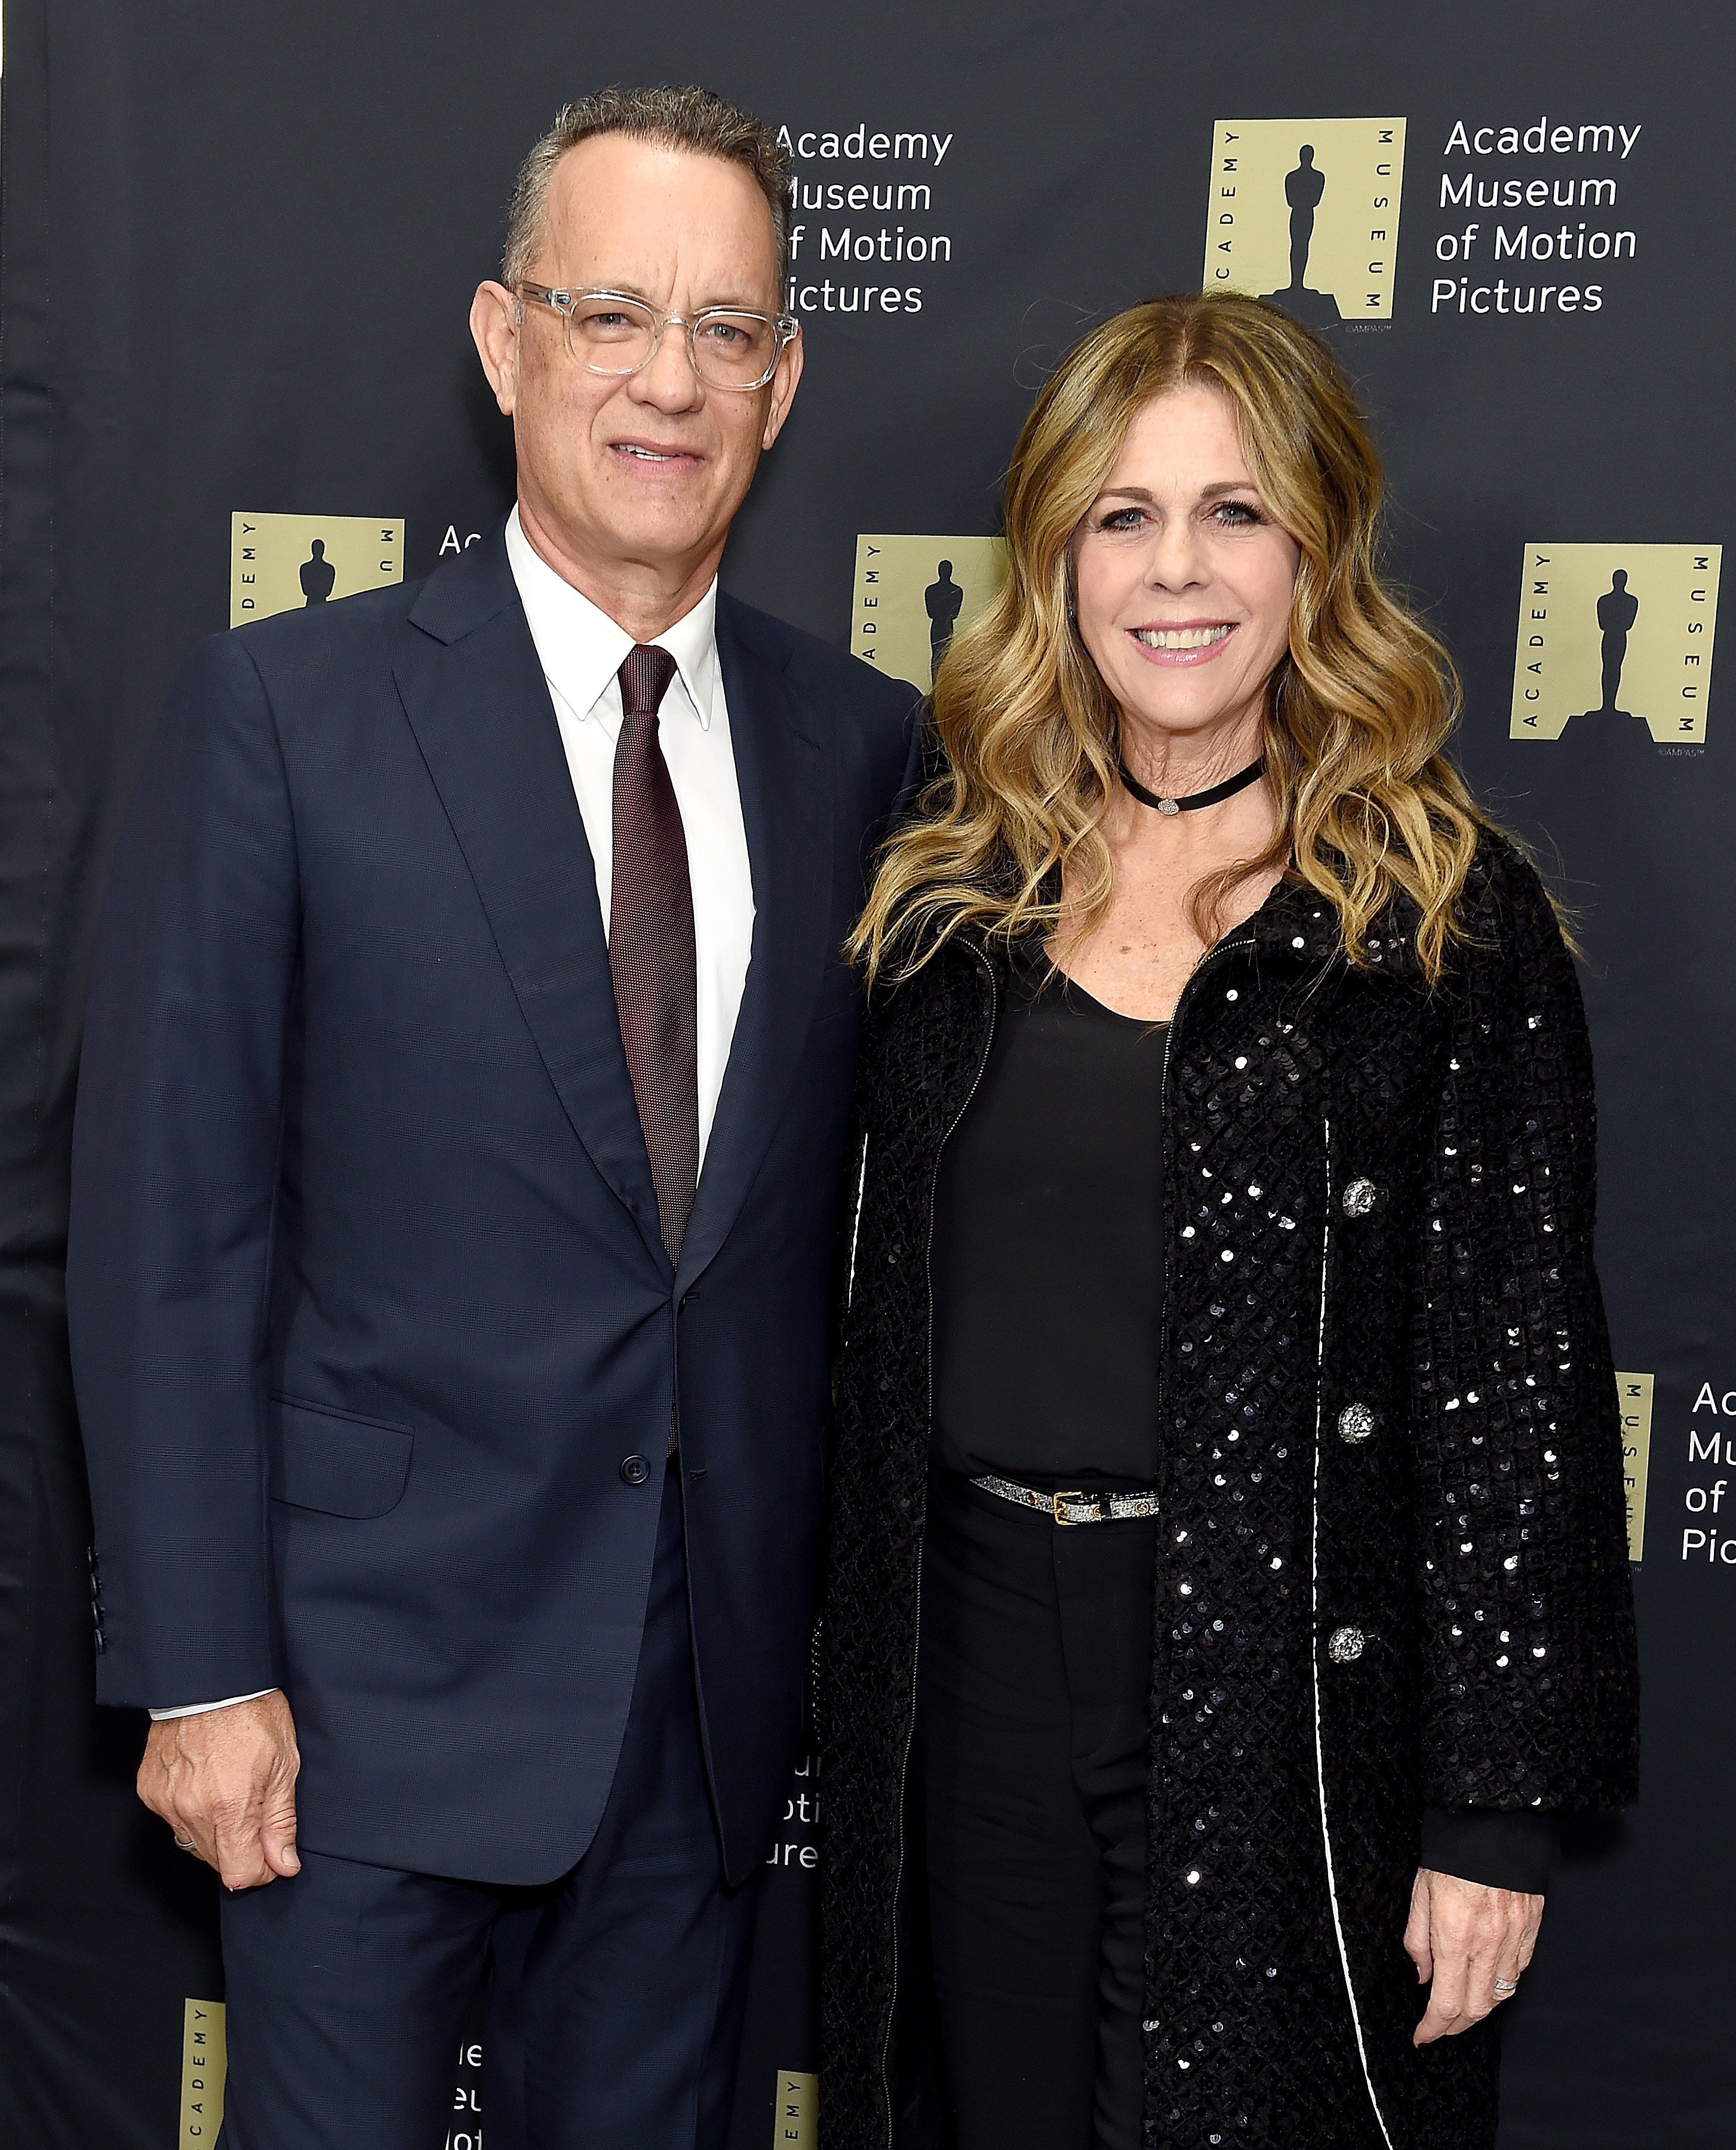 Tom Hanks and Rita Wilson attend the Unveiling of the Fully Restored Saban Building at Petersen Automotive Museum on December 4, 2018, in Los Angeles, California. | Photo: Getty Images